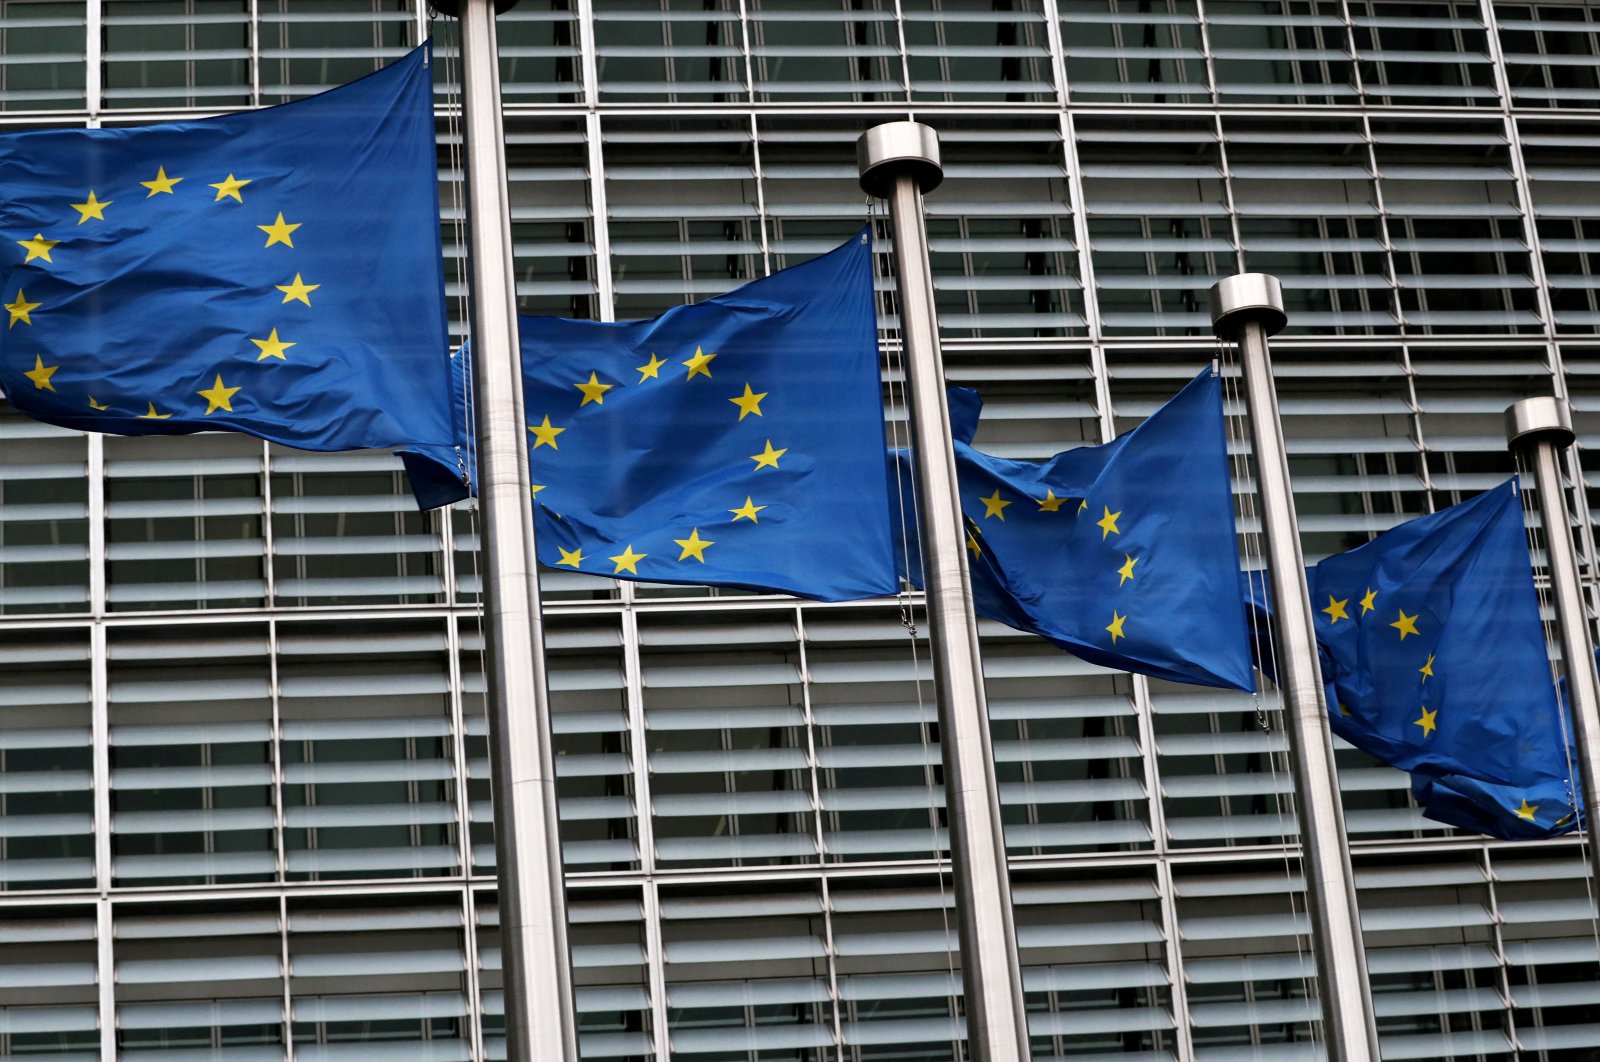 European Union flags fly outside the European Commission headquarters in Brussels, Belgium, March 6, 2019. (Reuters Photo)